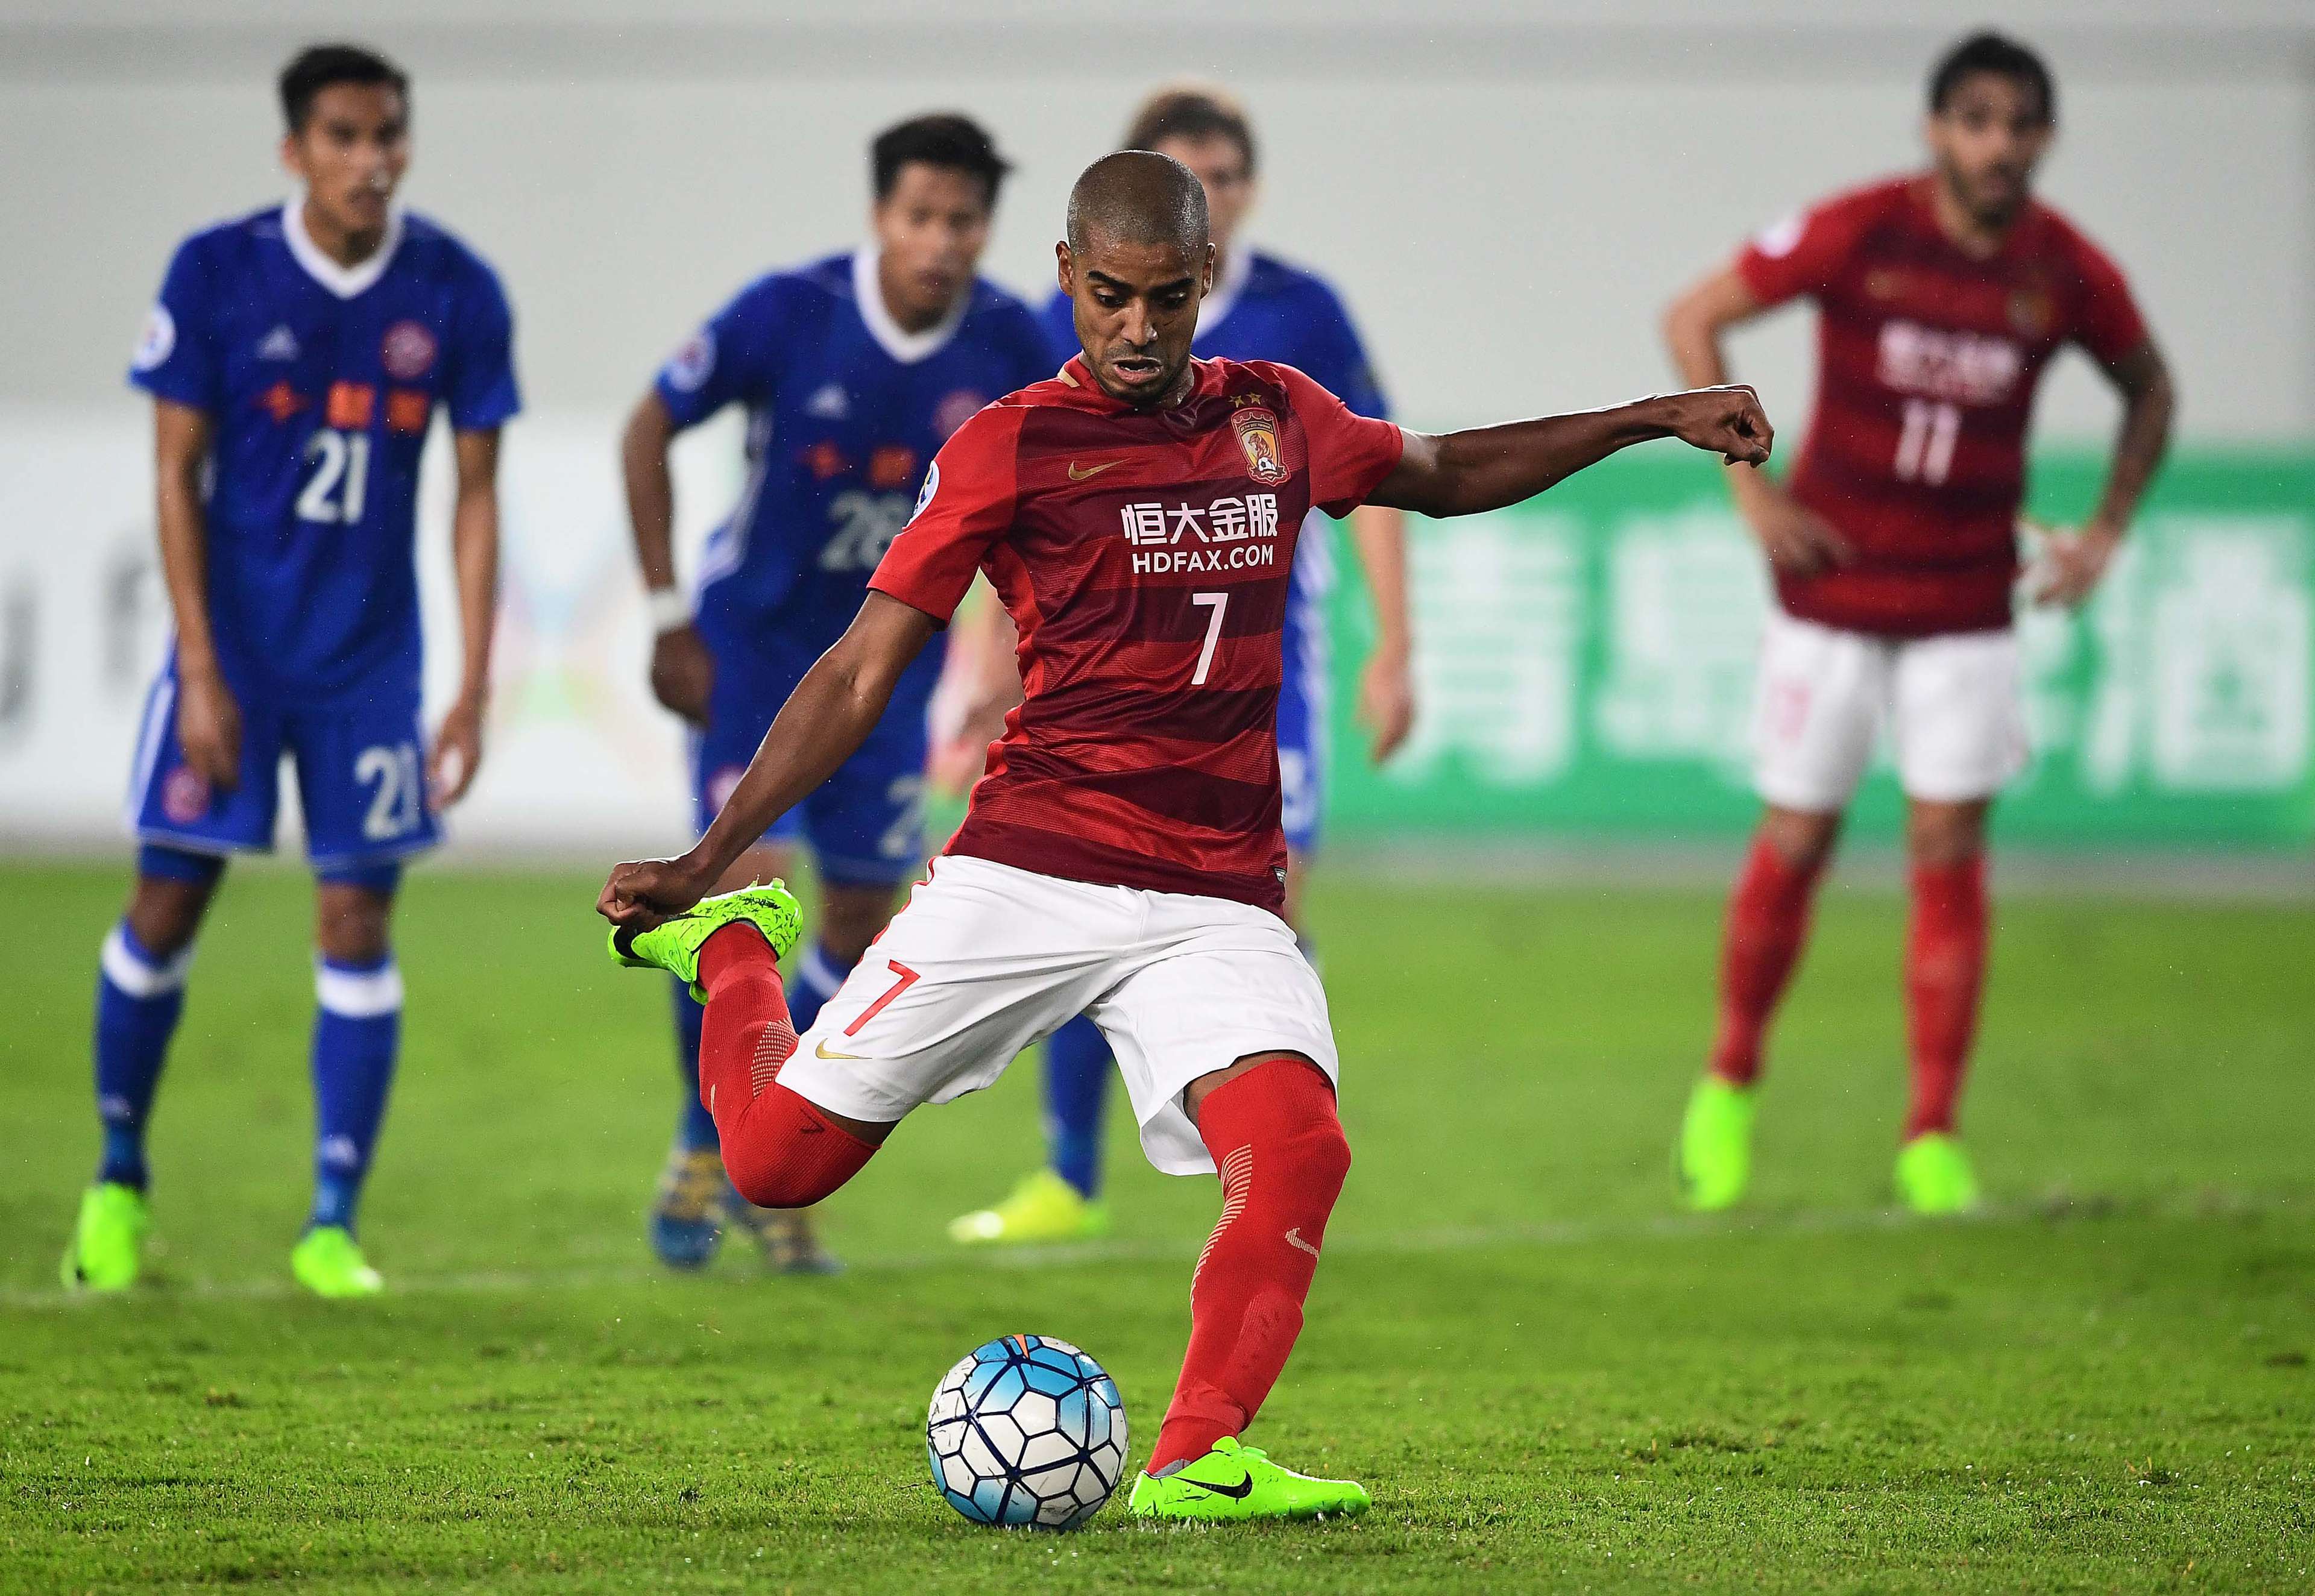 Alan Douglas de Carvalho of Guangzhou Evergrande takes a penalty during the team's AFC Champions League group stage football match against Eastern FC in Guangzhou